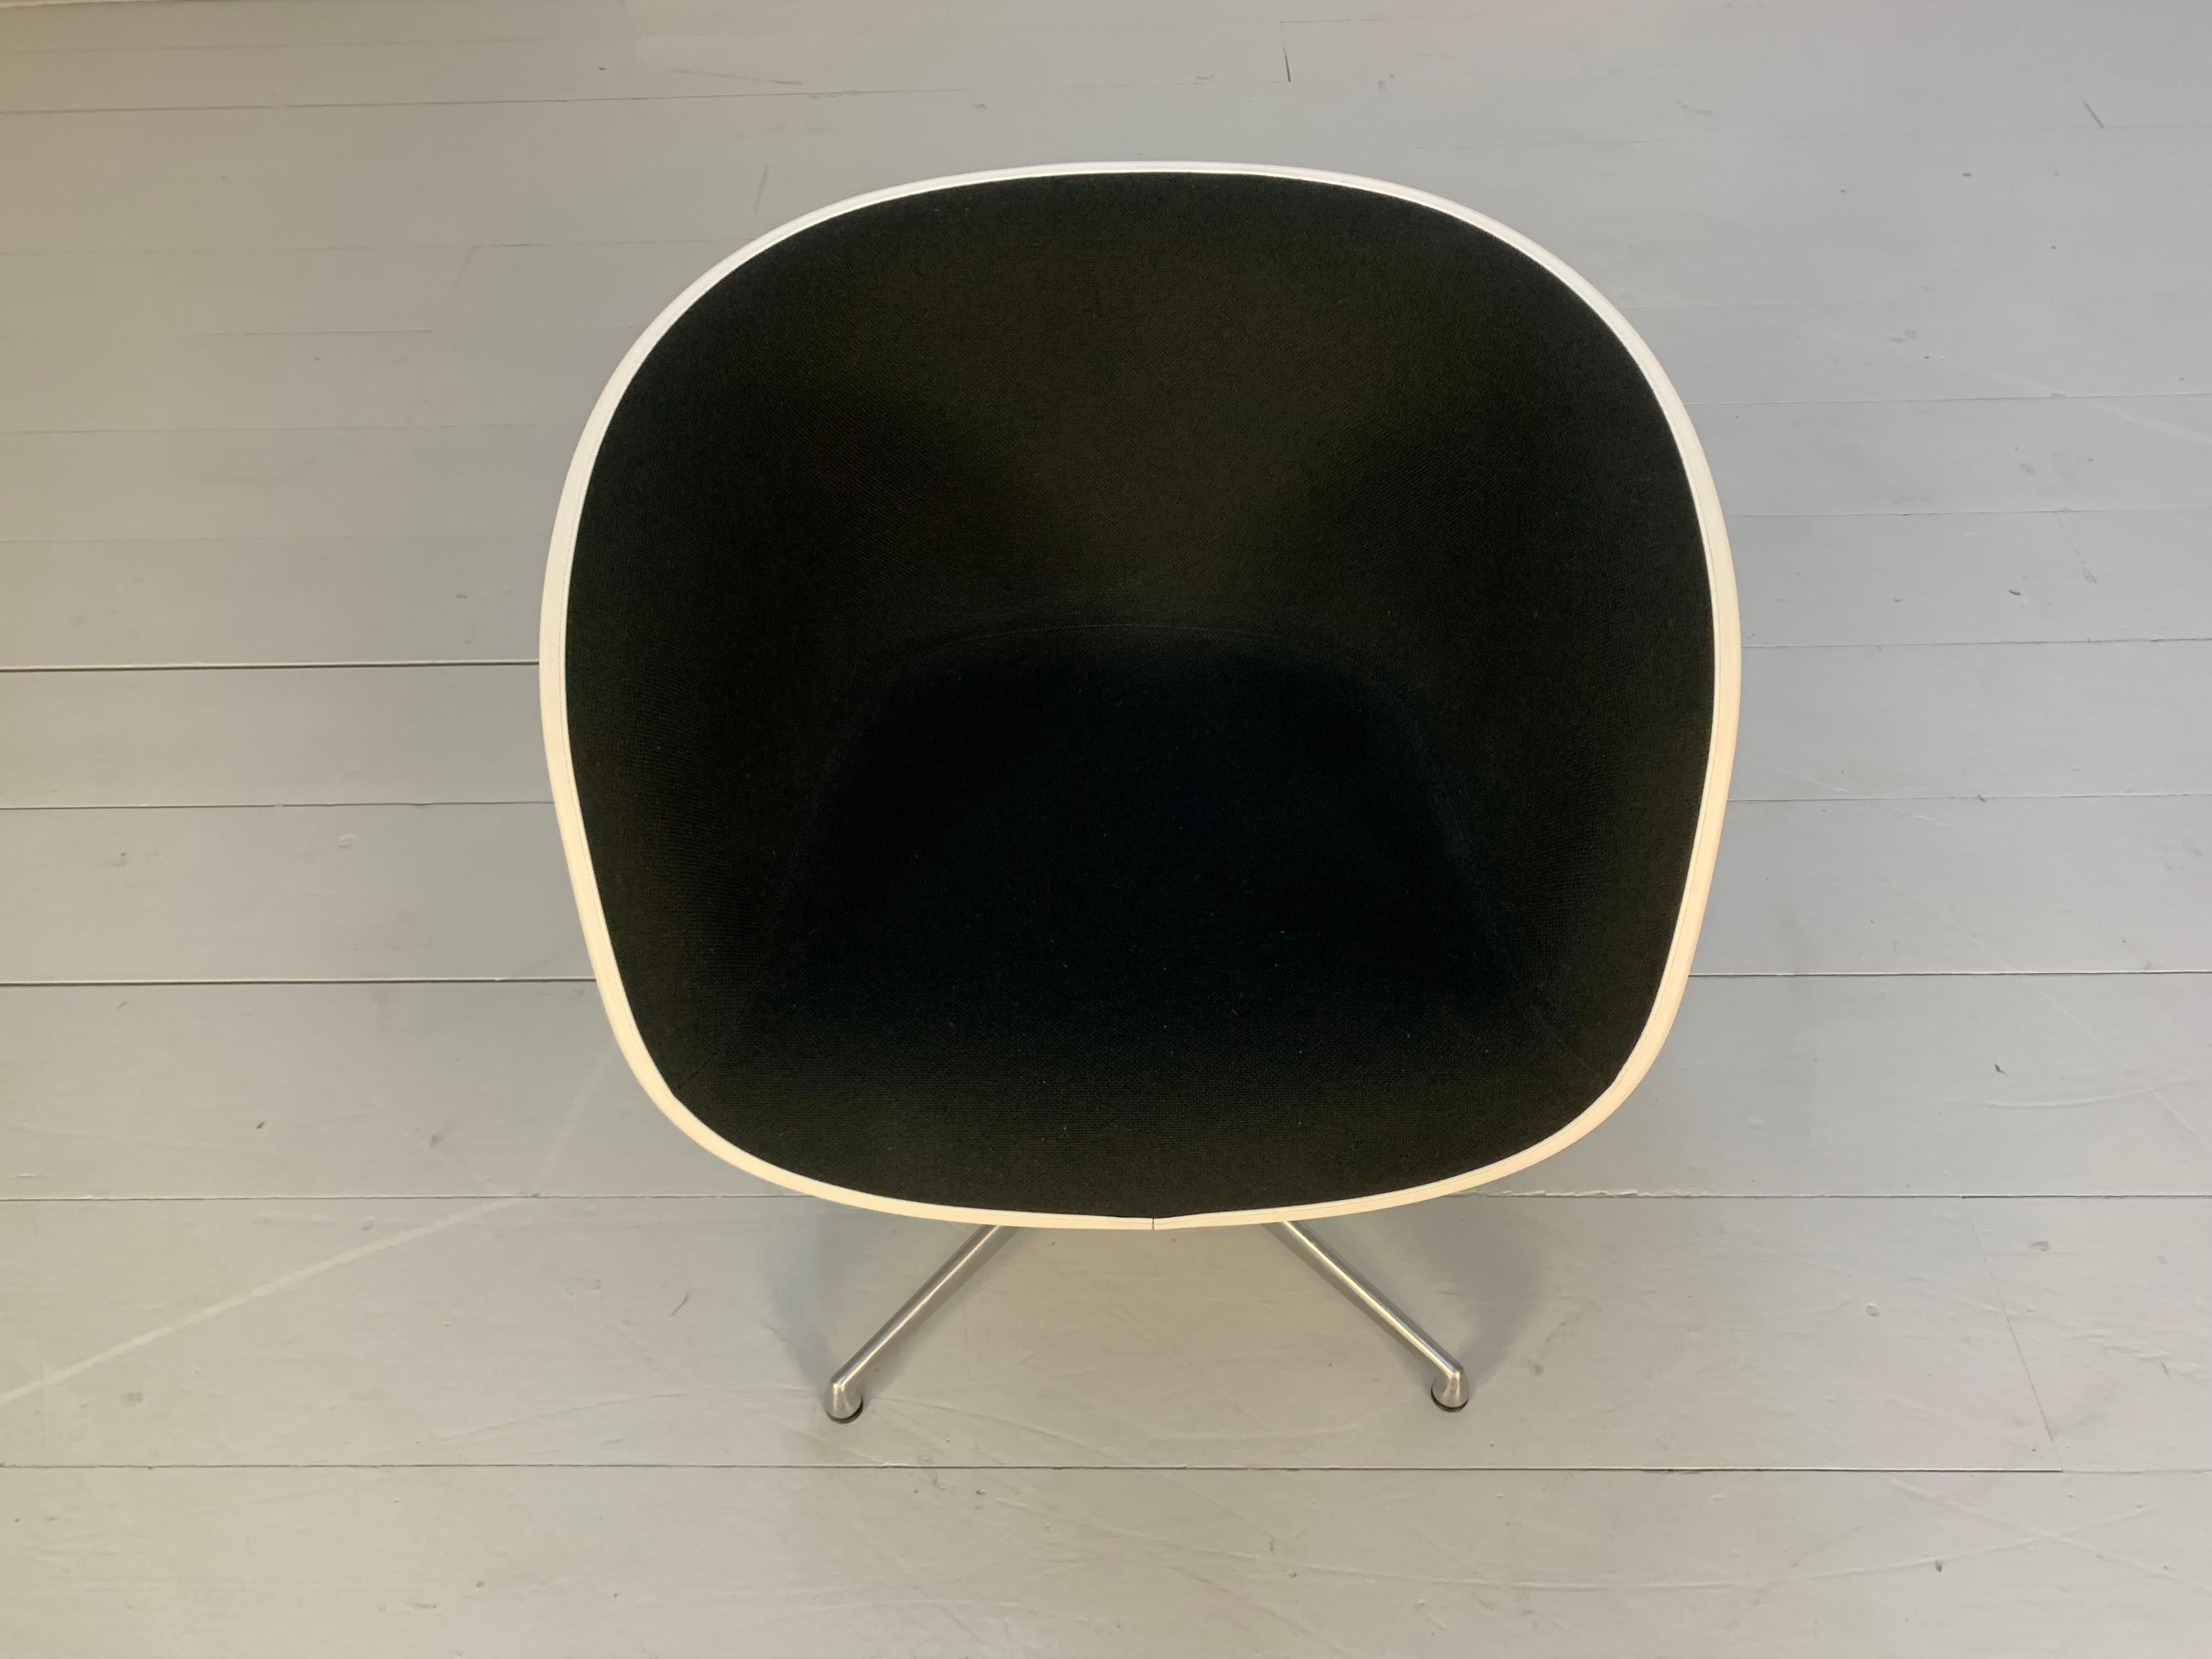 Vitra “La Fonda” Eames Chair & Marble Table in Black Hopsack For Sale 6